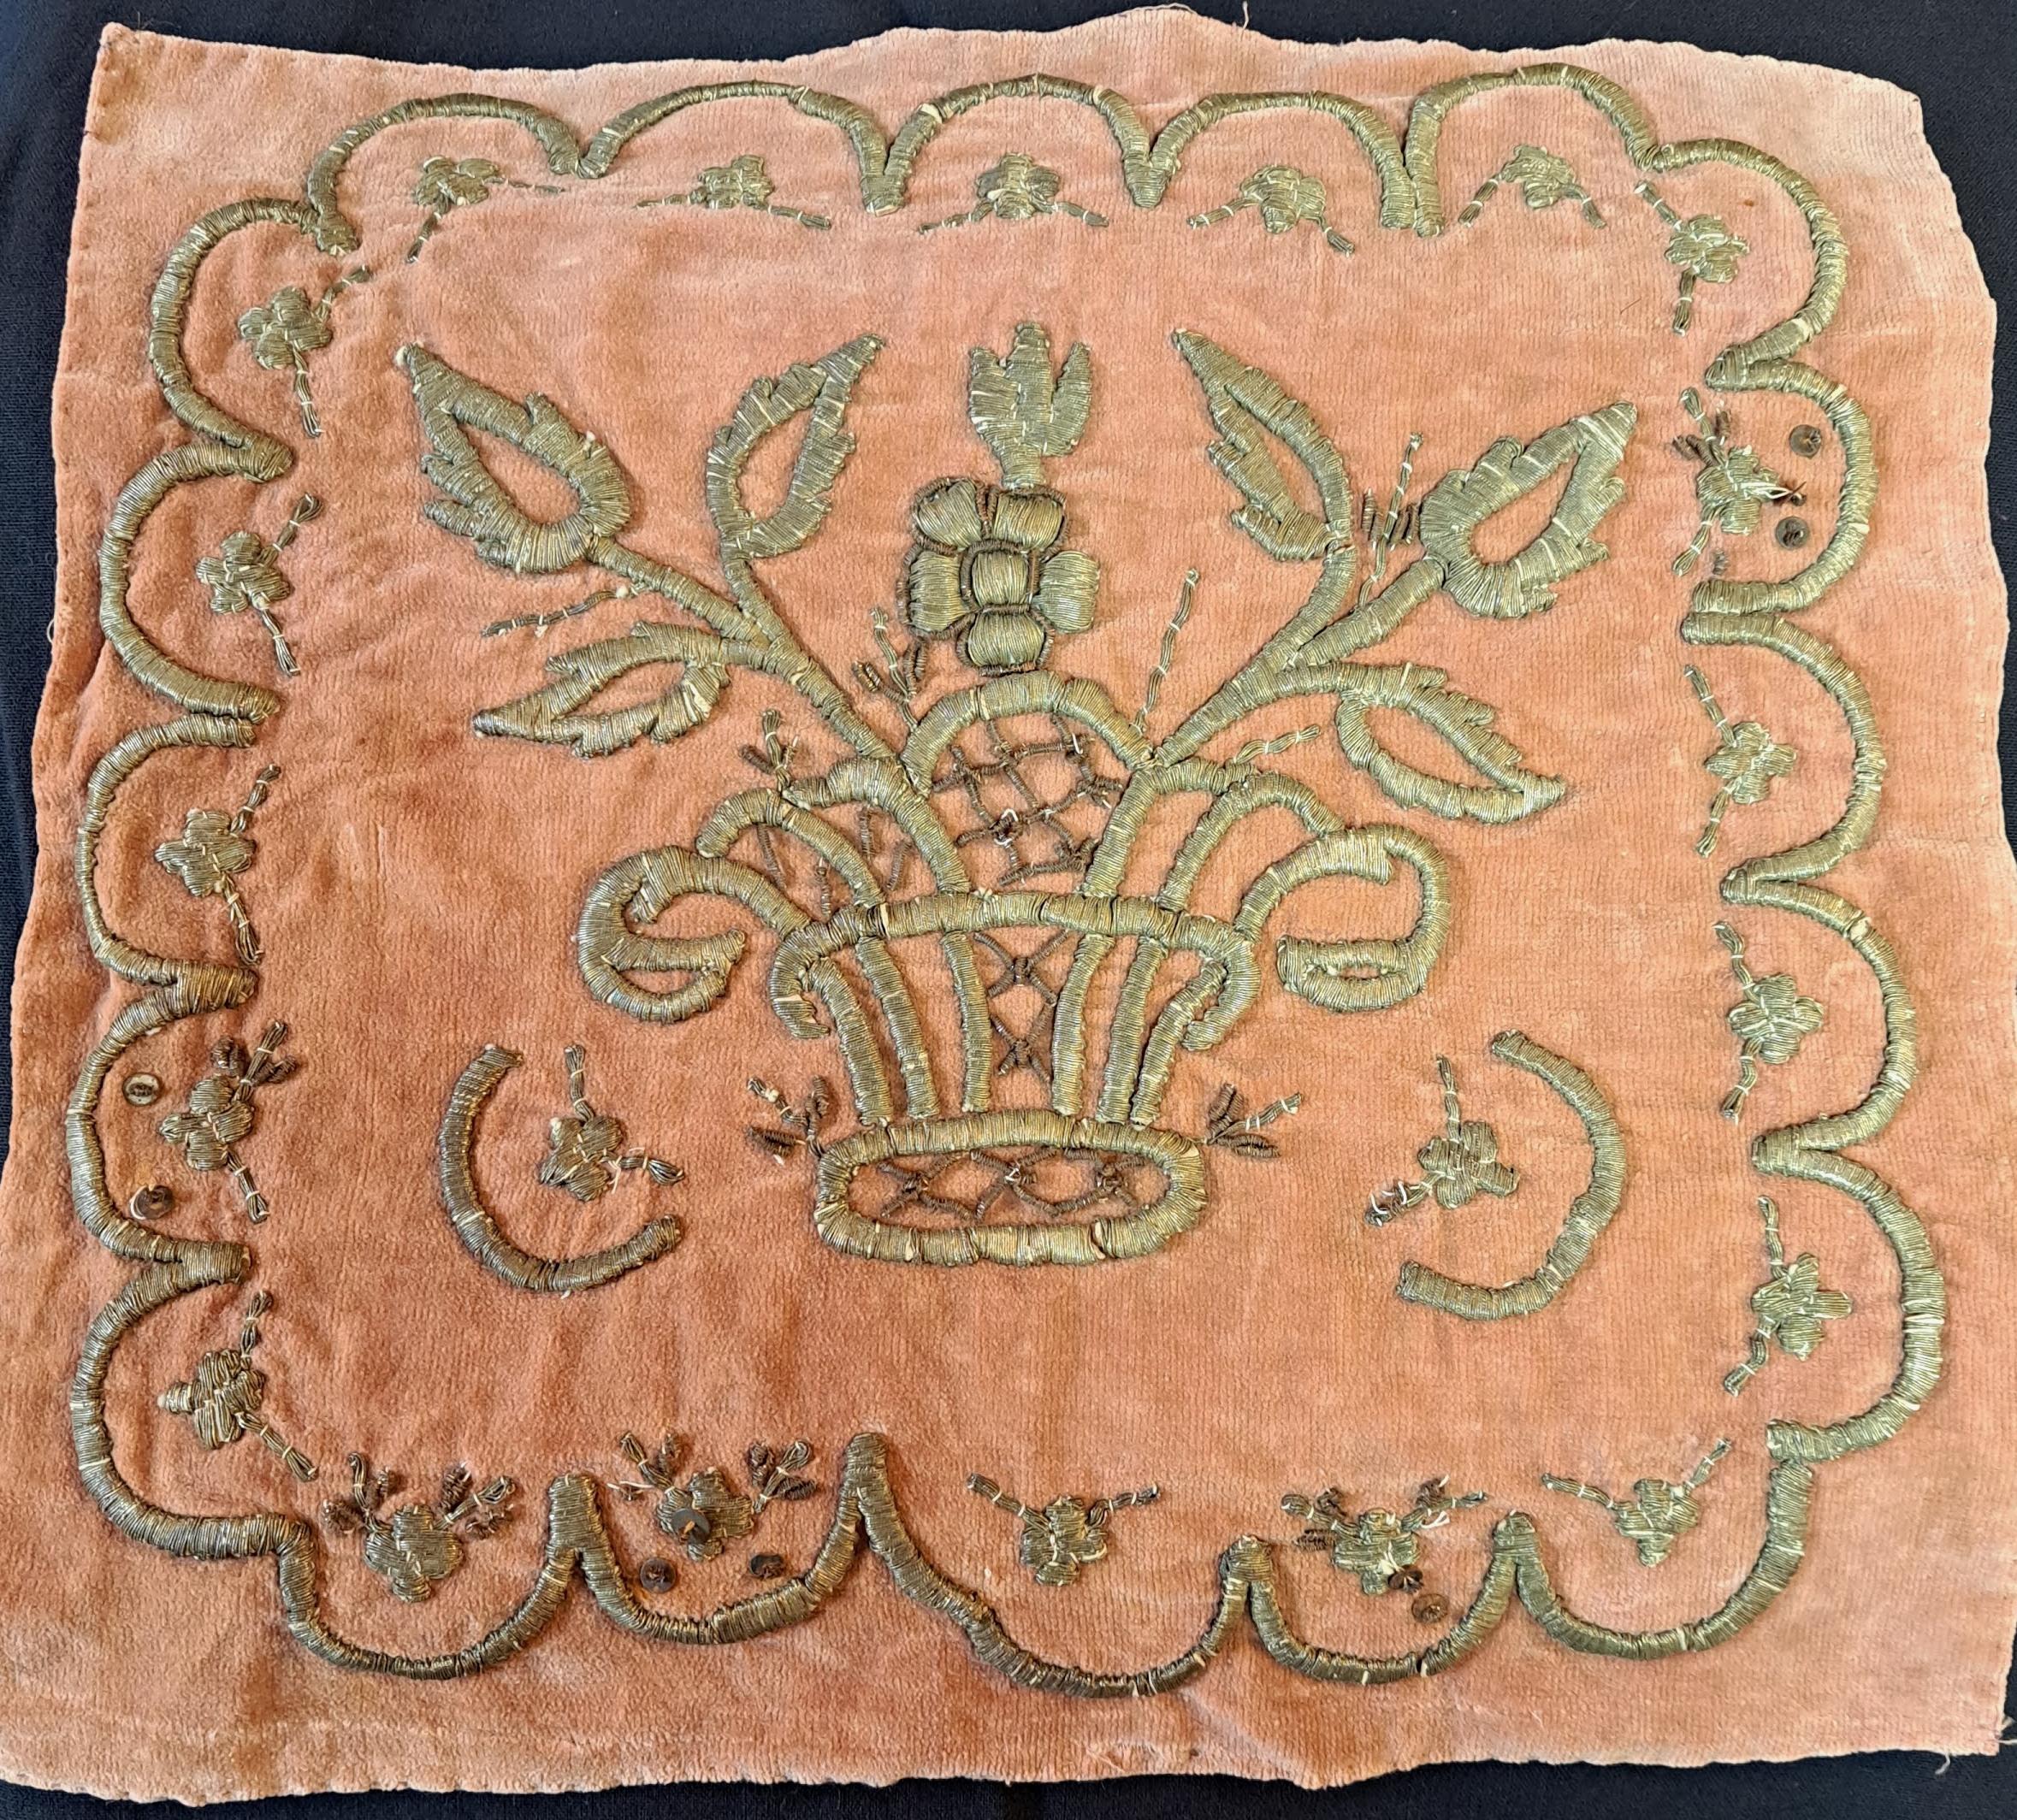 Pretty small antique embroidered velvet panel from the Ottoman period 
19th century Anatolia

A lovely piece ideal for framing or art/sewing project.